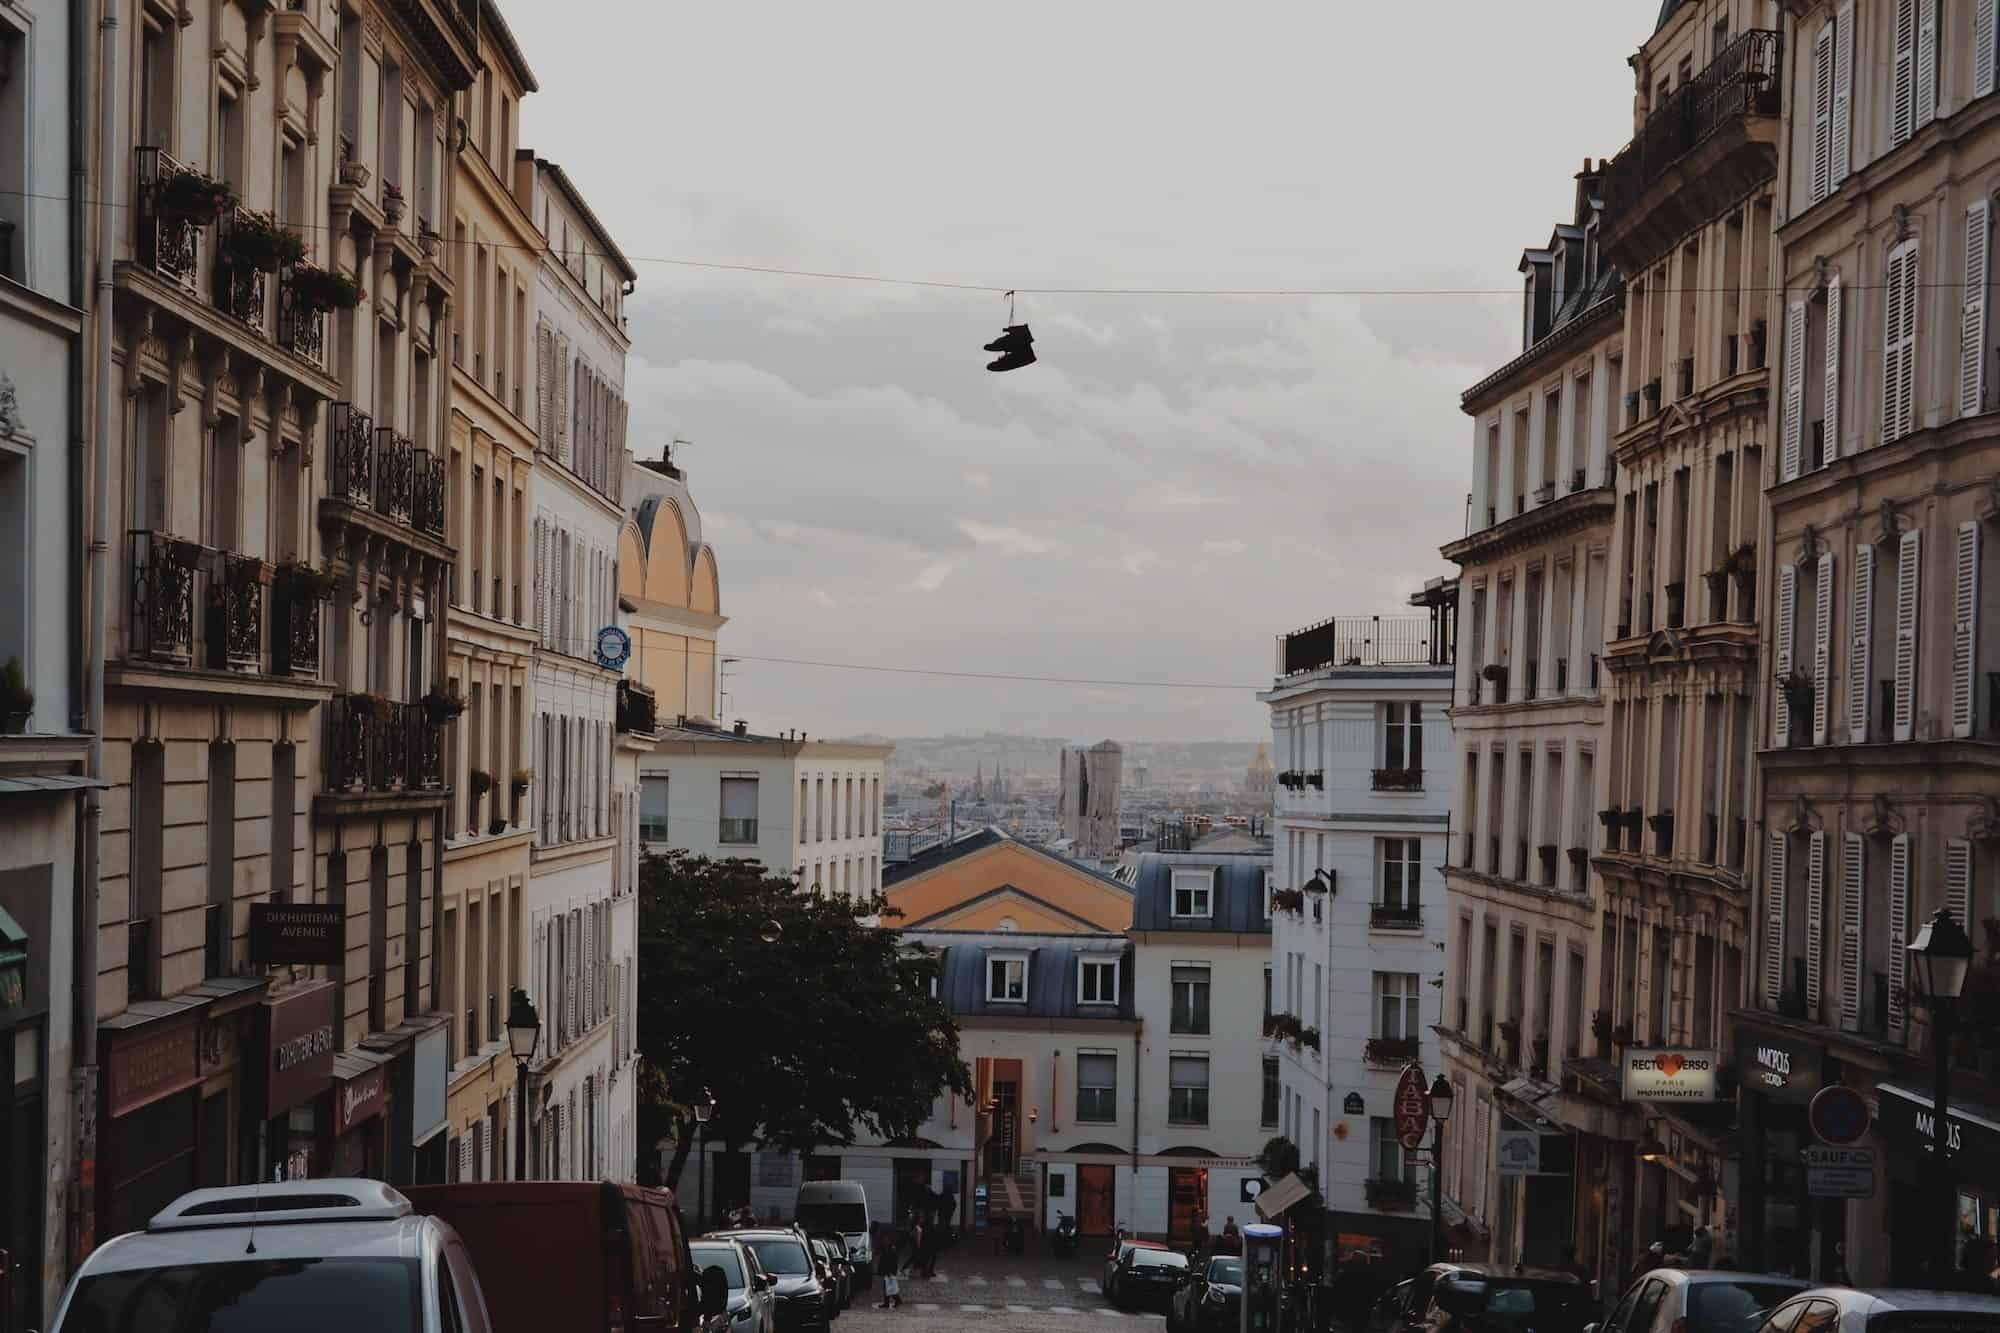 A street scene of Montmartre as the sun sets, which apartment buildings on either side and shoes hanging on street cables in the center. 